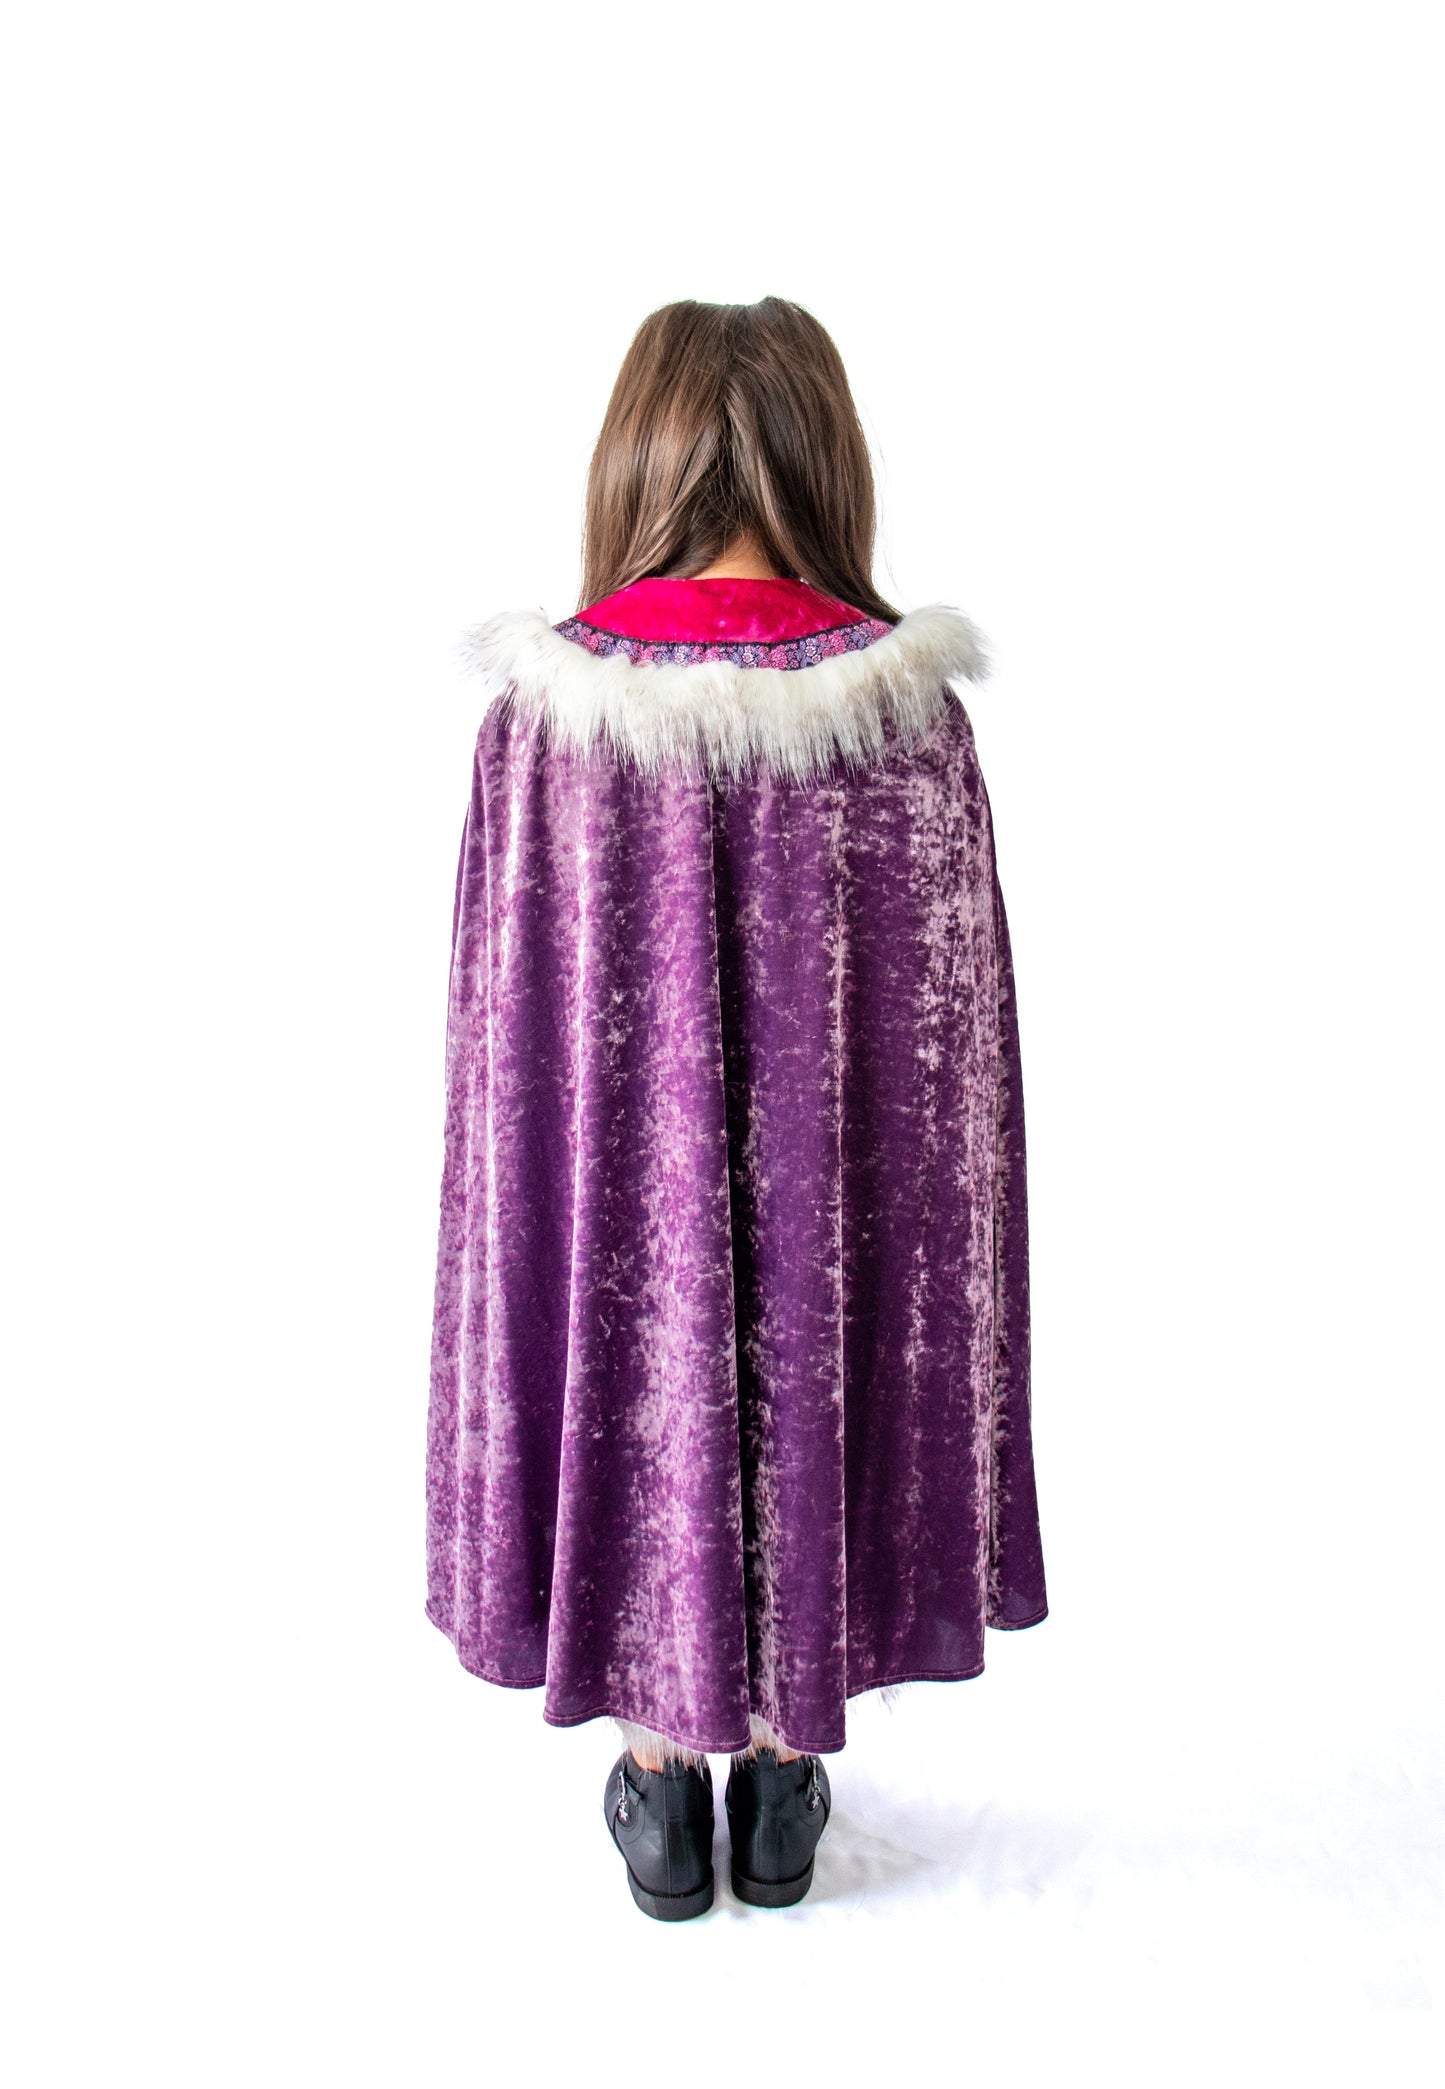 Kid's Prince Cape Lavender flap of faux fur at large collar goes down over the shoulders